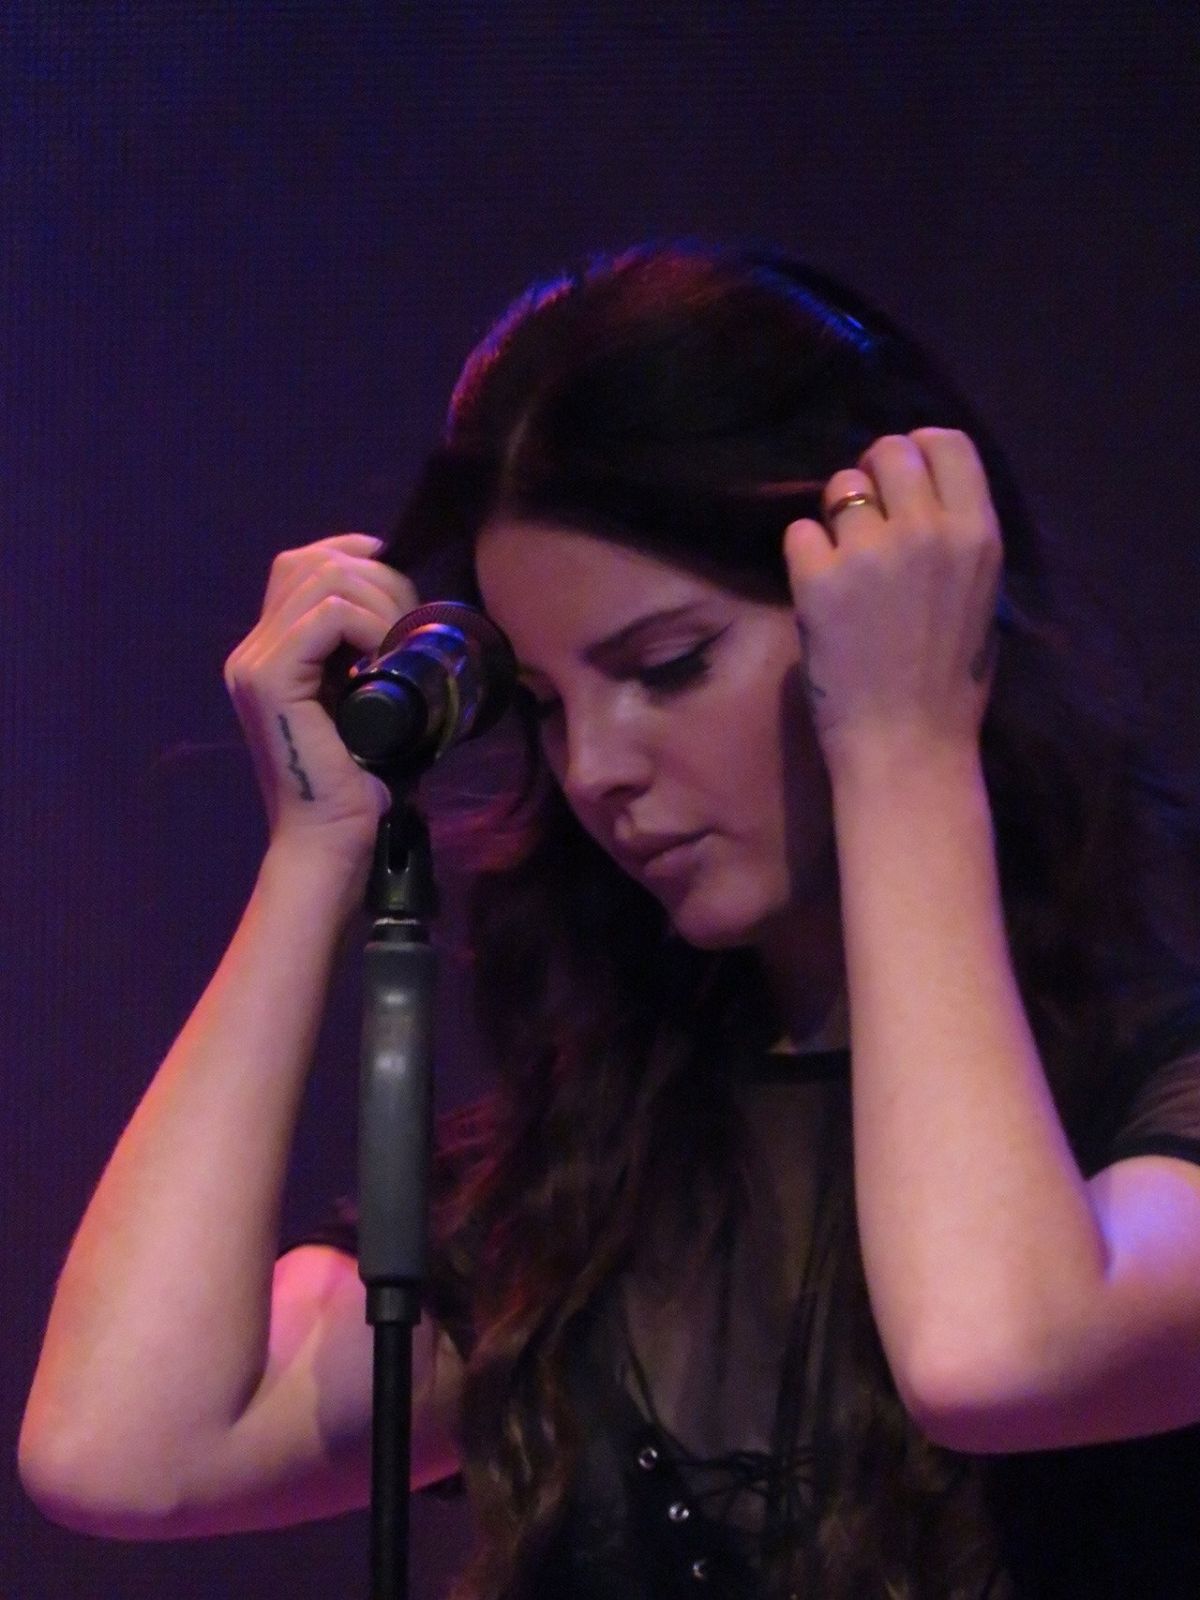 lana-del-rey-performs-at-the-house-of-blues-in-san-diego-07-31-2017_2.jpg